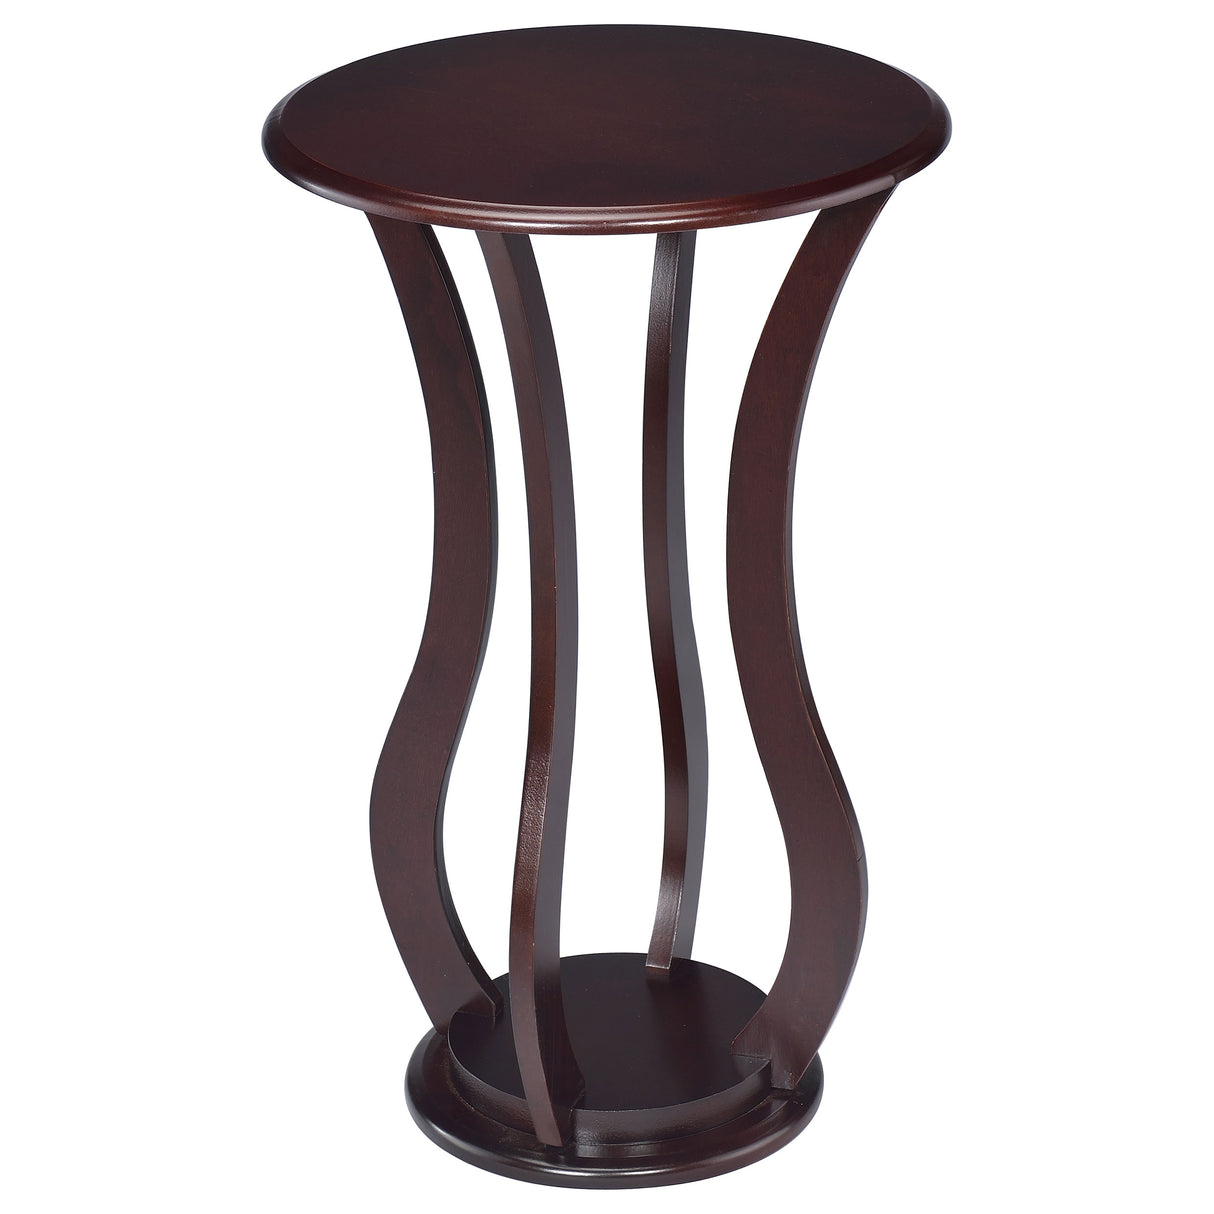 Side Table - Elton Round Top Accent Table Cherry